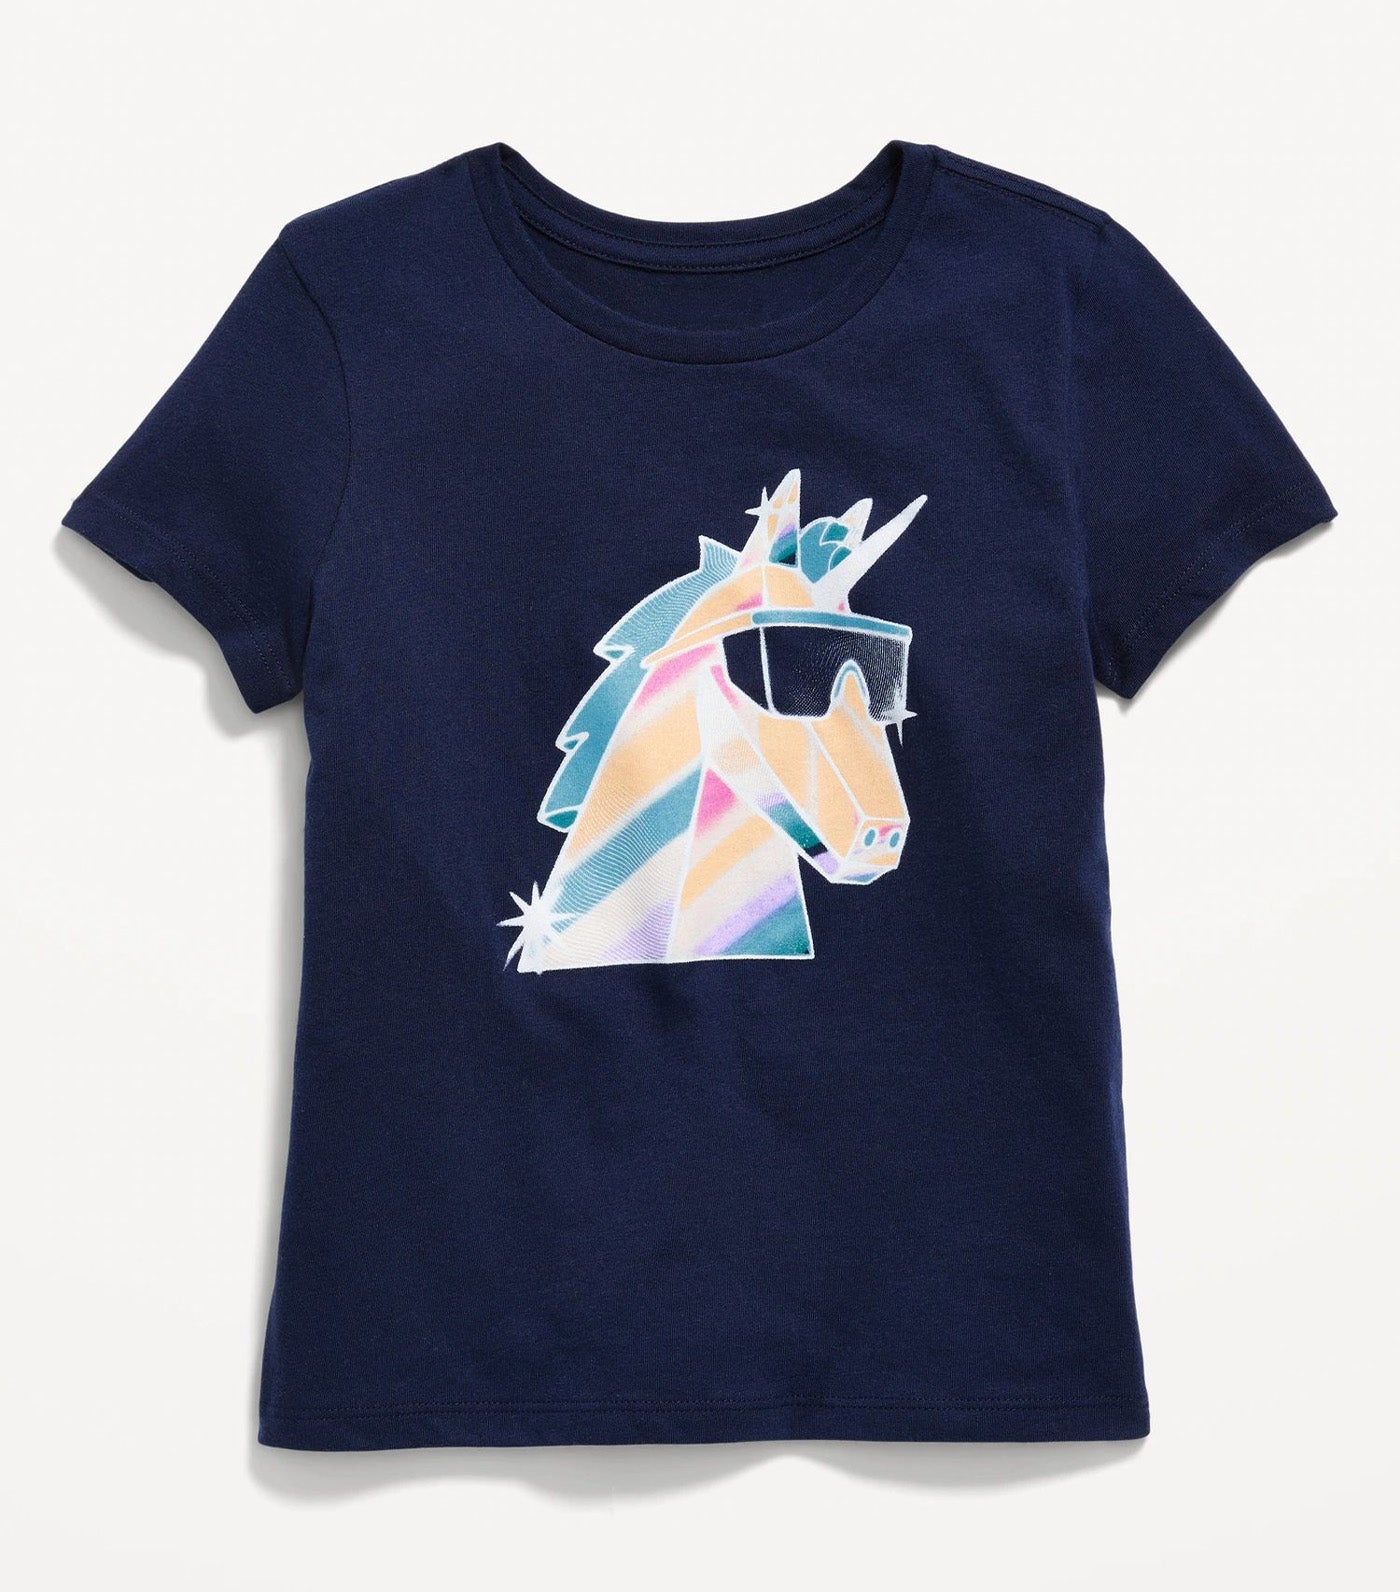 Short-Sleeve Graphic T-Shirt for Girls - In the Navy